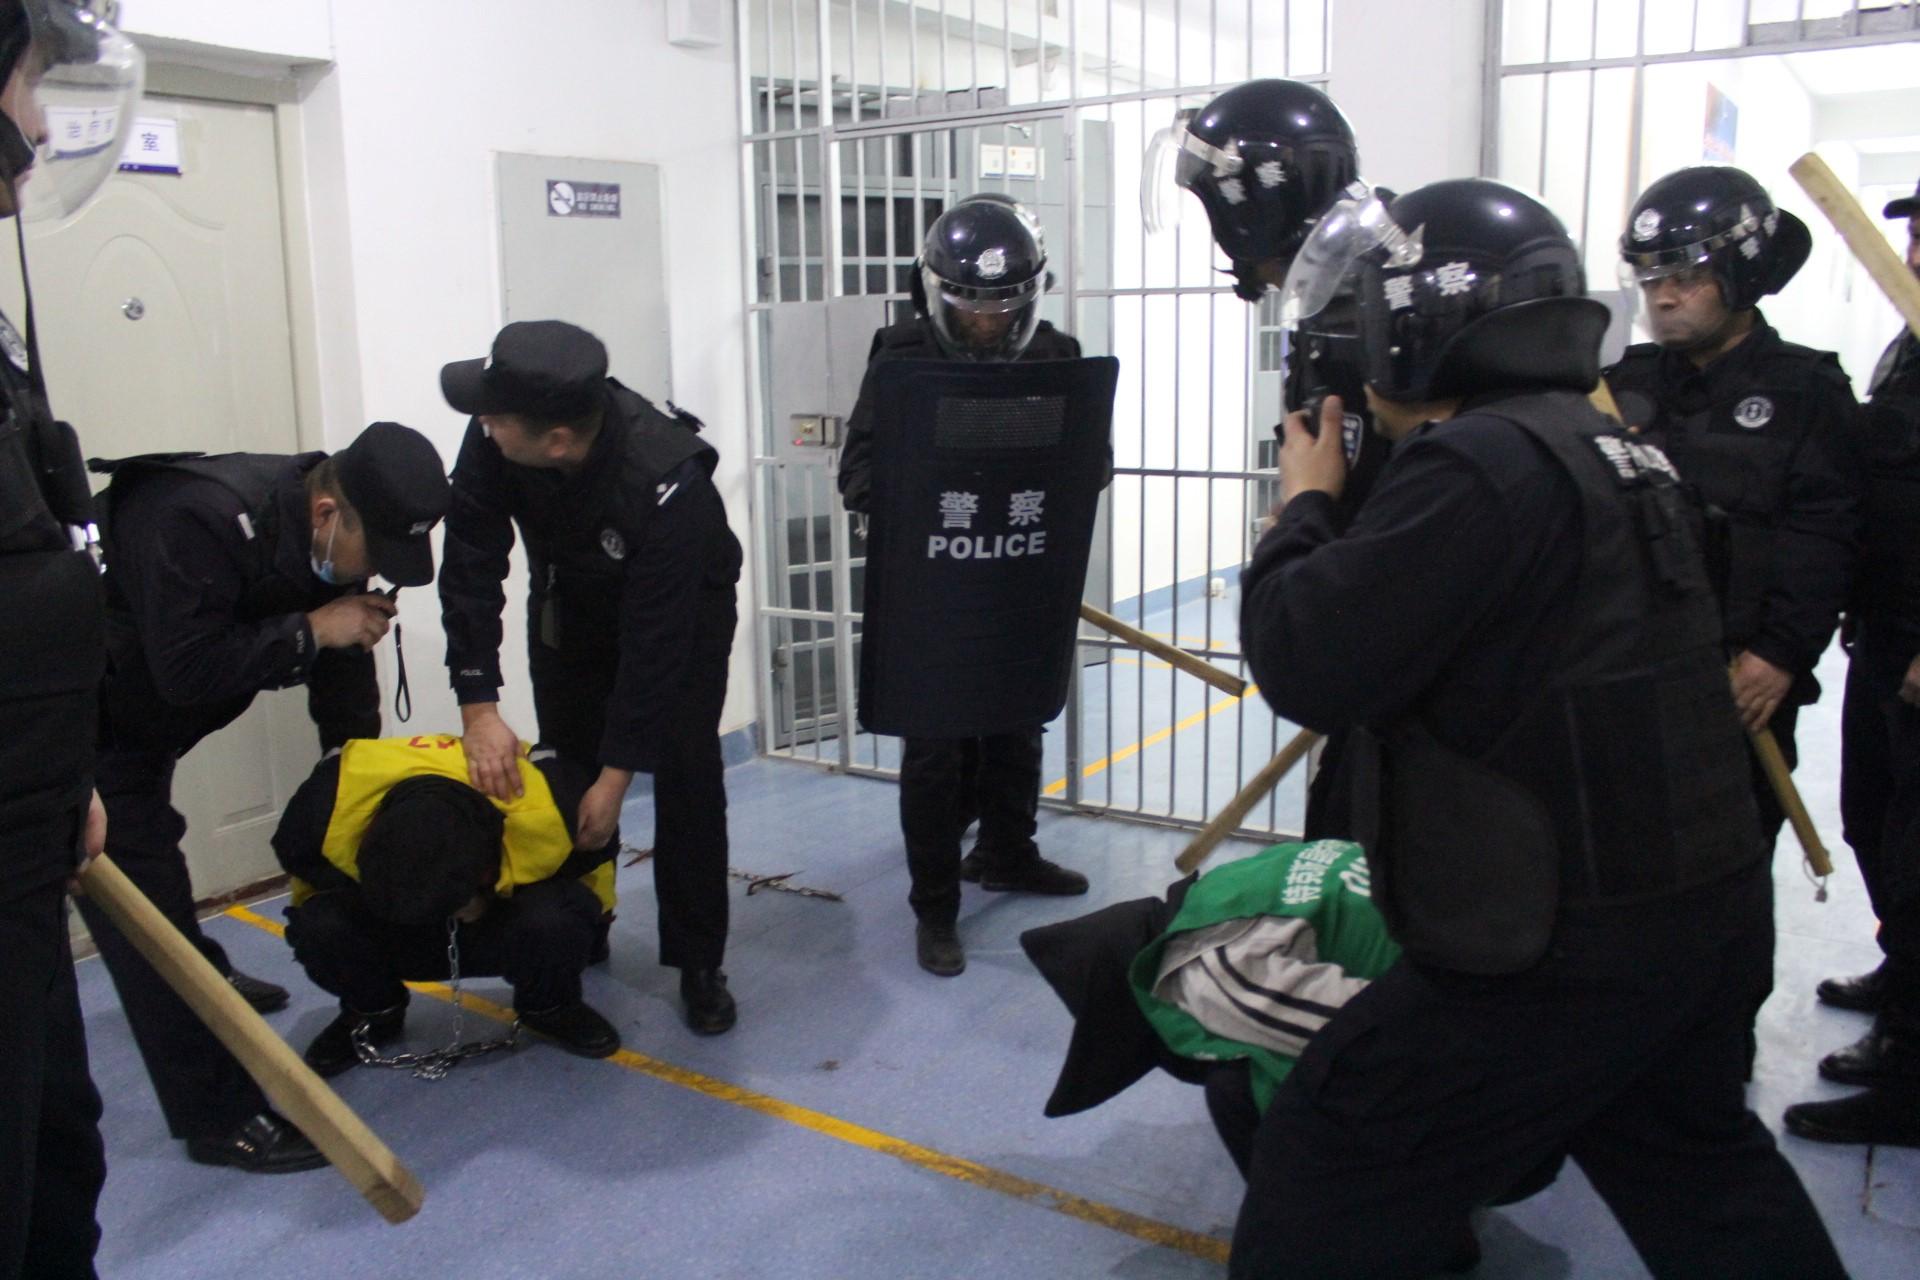 This undated handout image released by The Victims of Communism Memorial Foundation on May 24, shows SWAT team personnel engaged in an apparent anti-escape or anti-riot drill at the Tekes County Detention Centre in the Xinjiang Region of western China in February 2018. Photo: AFP